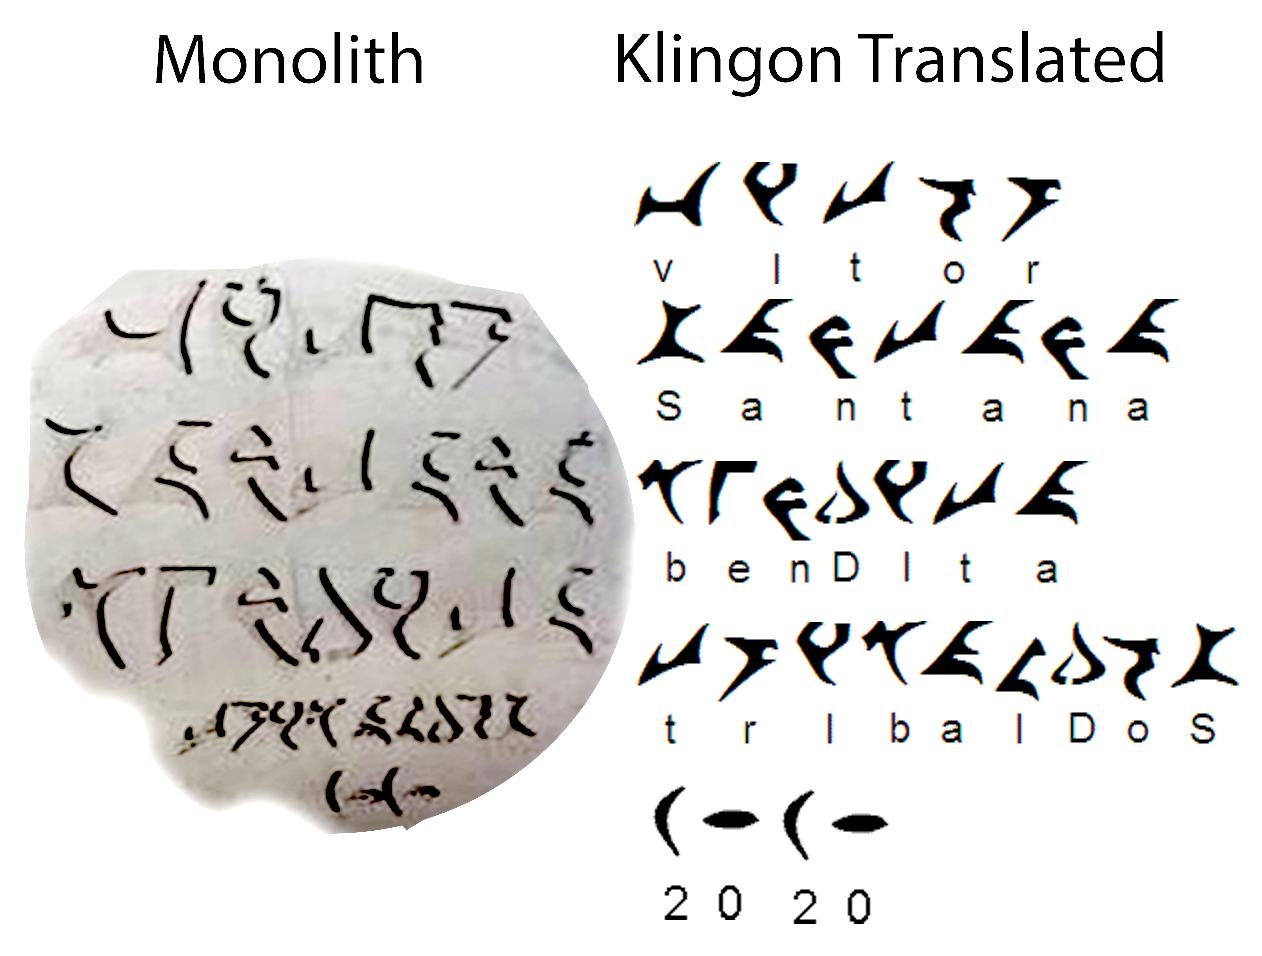 Visual Translation of the text on the Monolith.